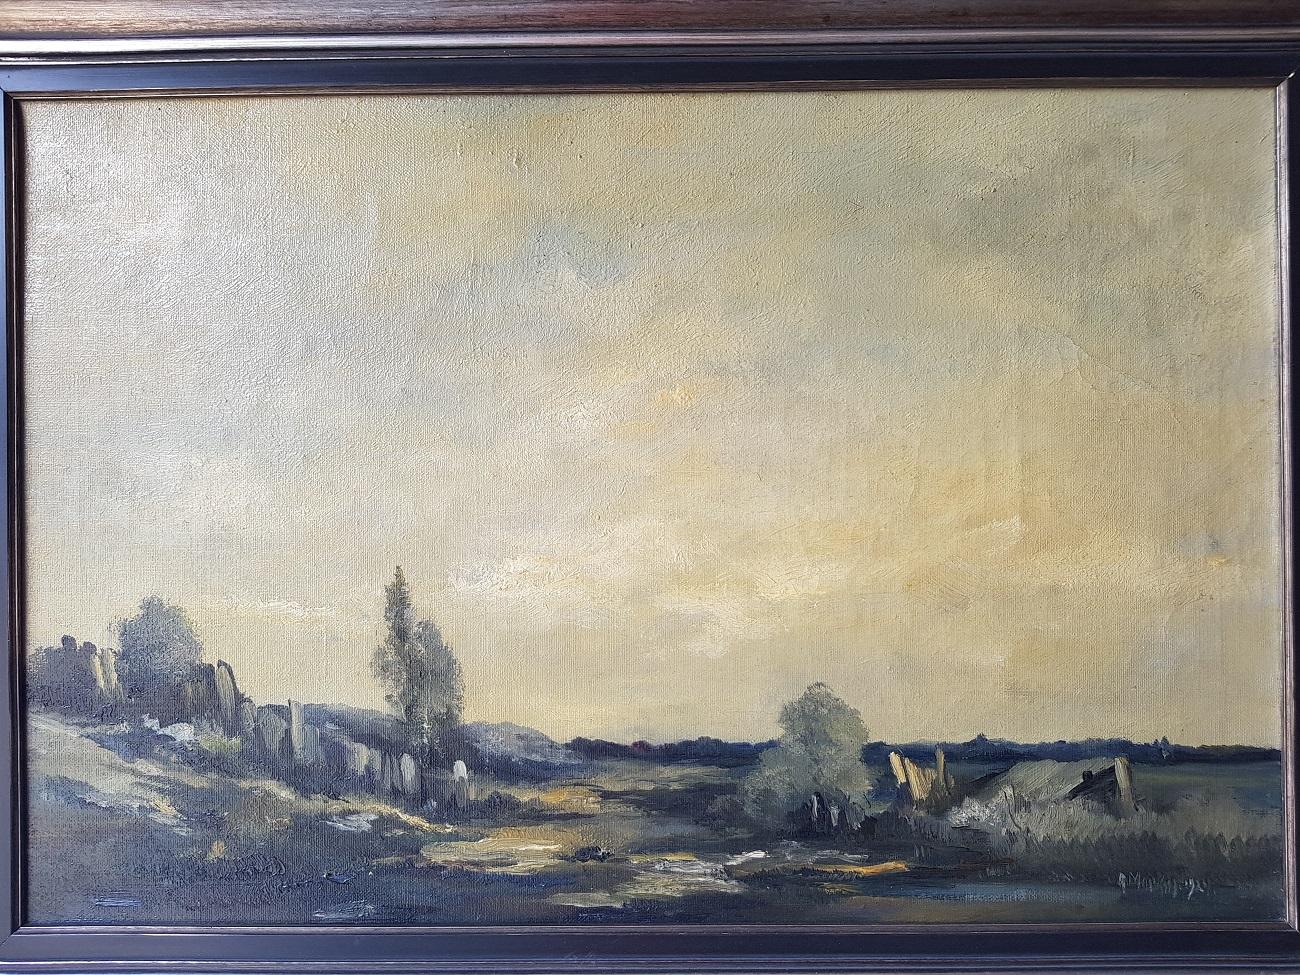 Oil painting on canvas signed by Antoon Markus (1870-1955) dated 1924 in Oosterbeek signed and dated lower right and painted in his typical style depicting a Dutch landscape, it has some crackle.

The measurements are include frame,
Depth 5.5 cm/